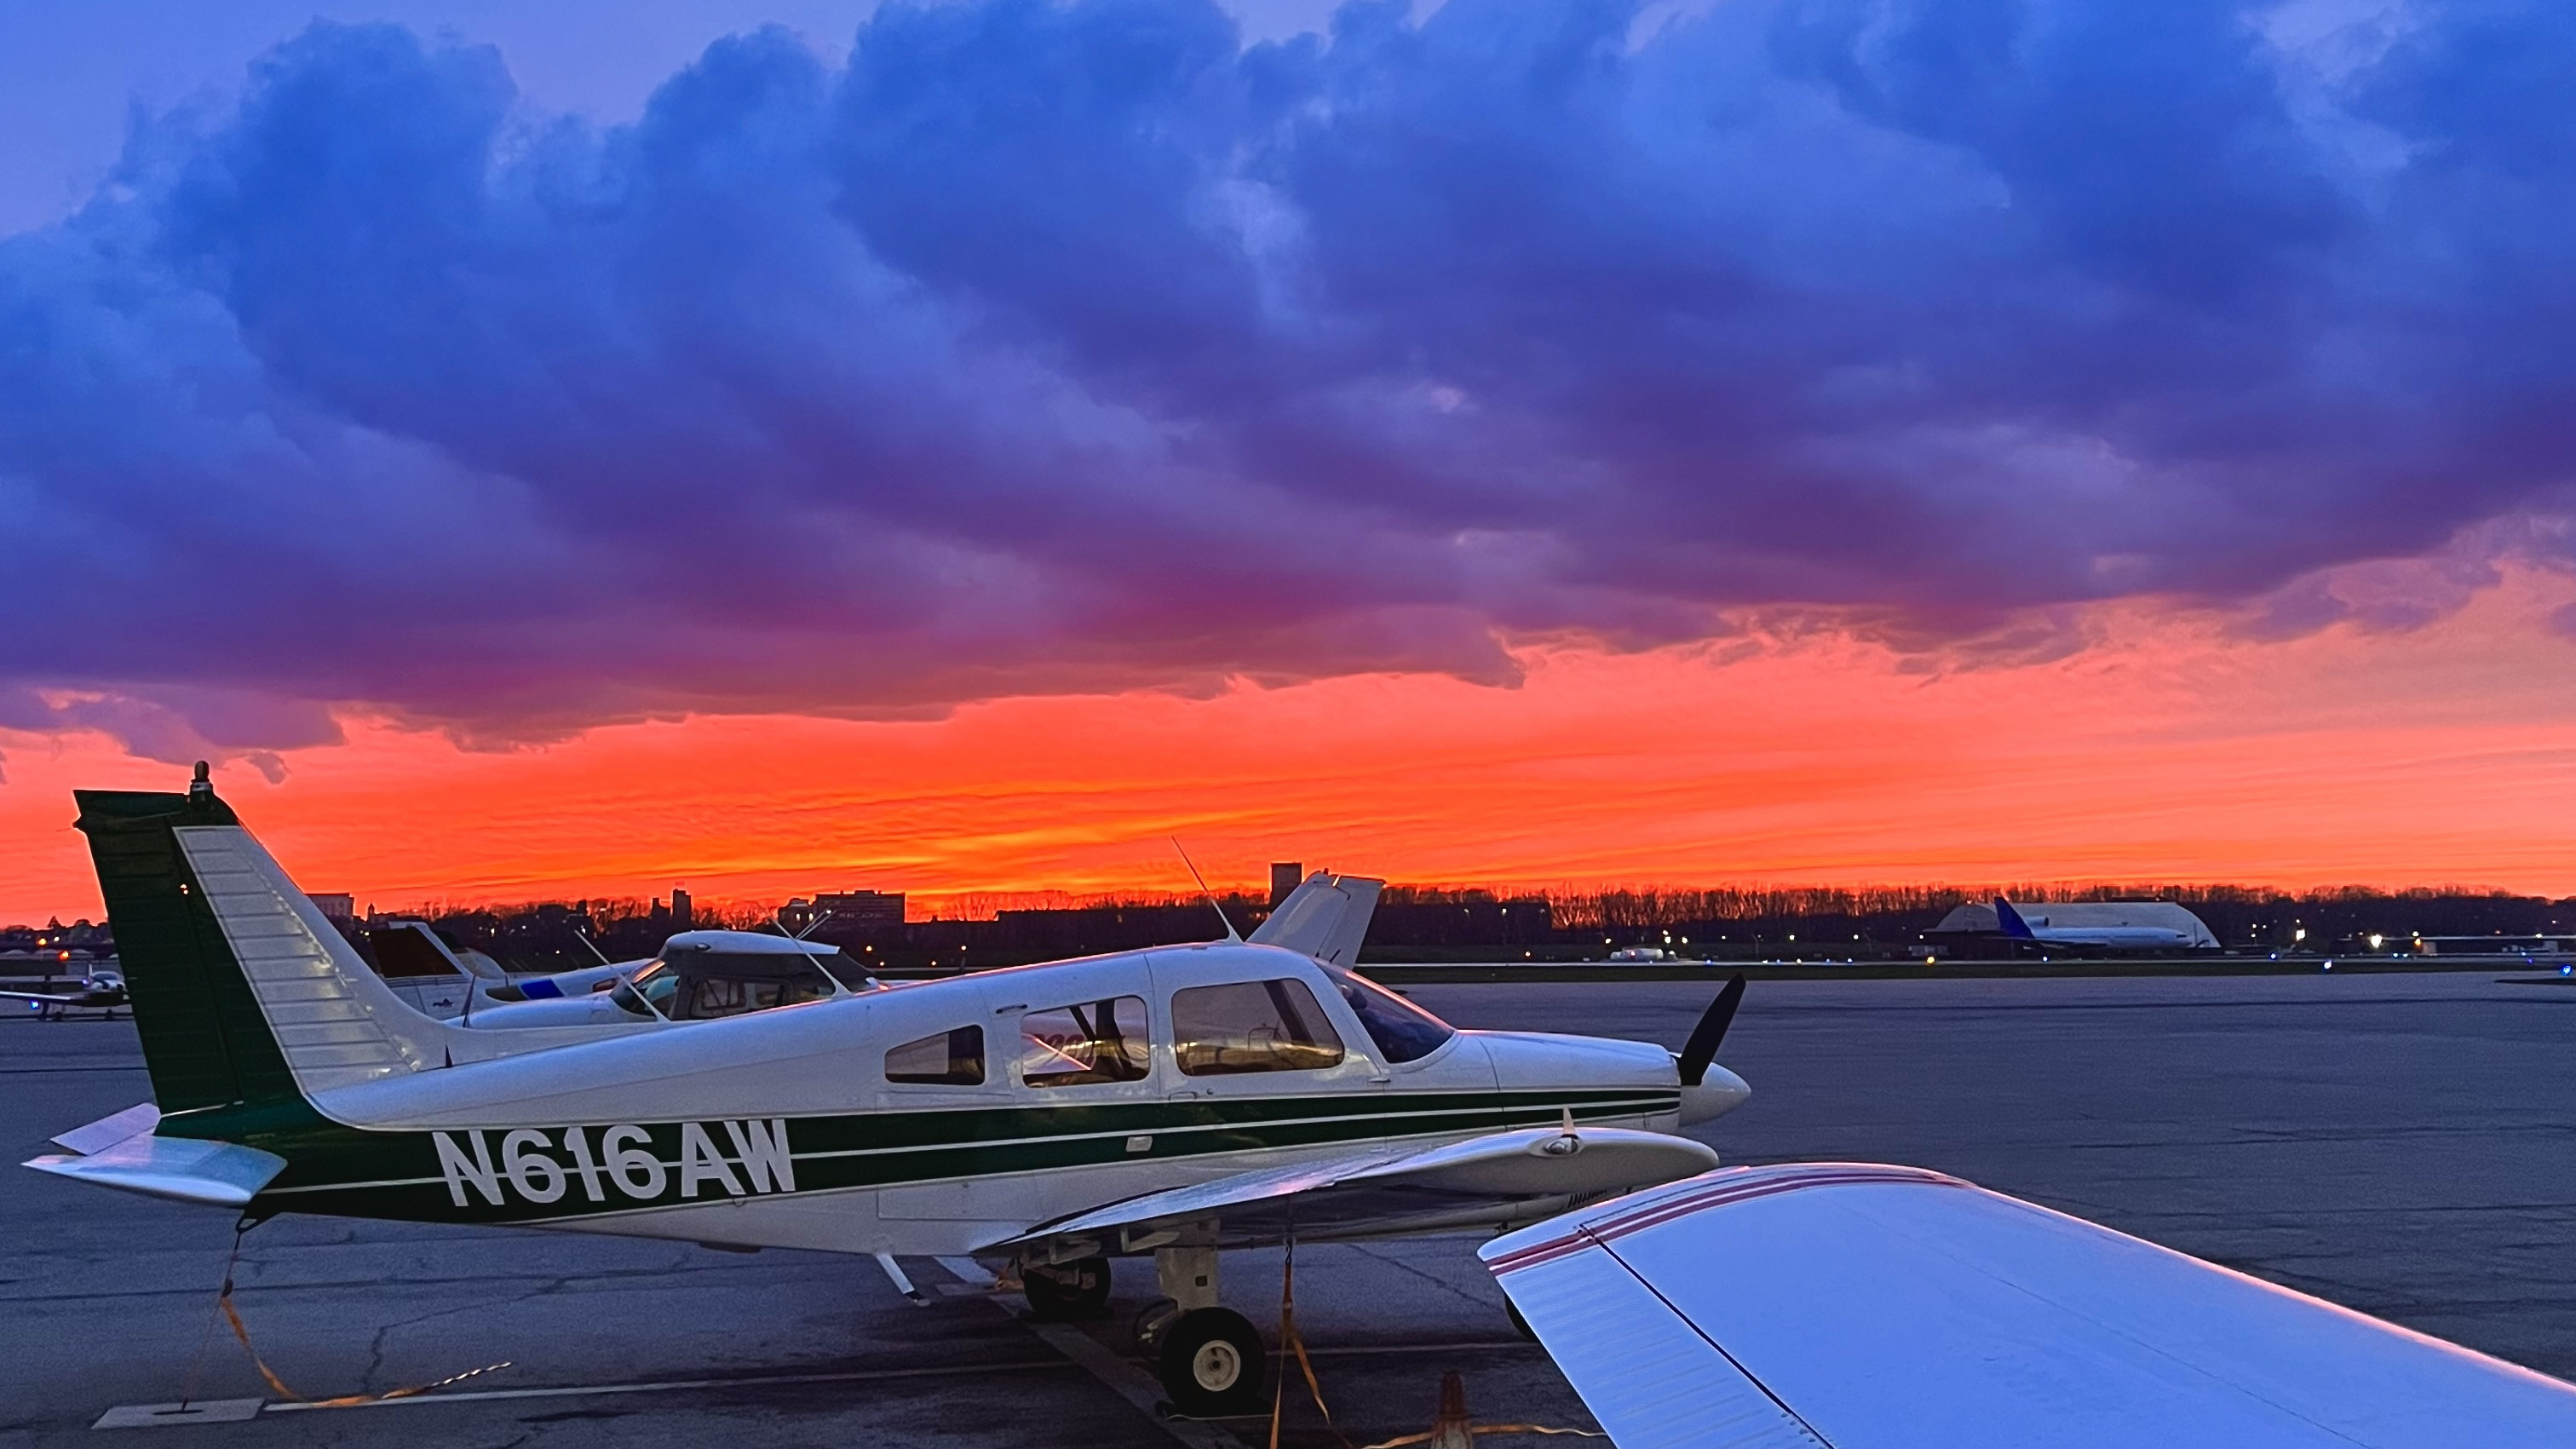 Part of ATD’s current fleet of training aircraft at sunset last week. Photo by Meagan Jackson.